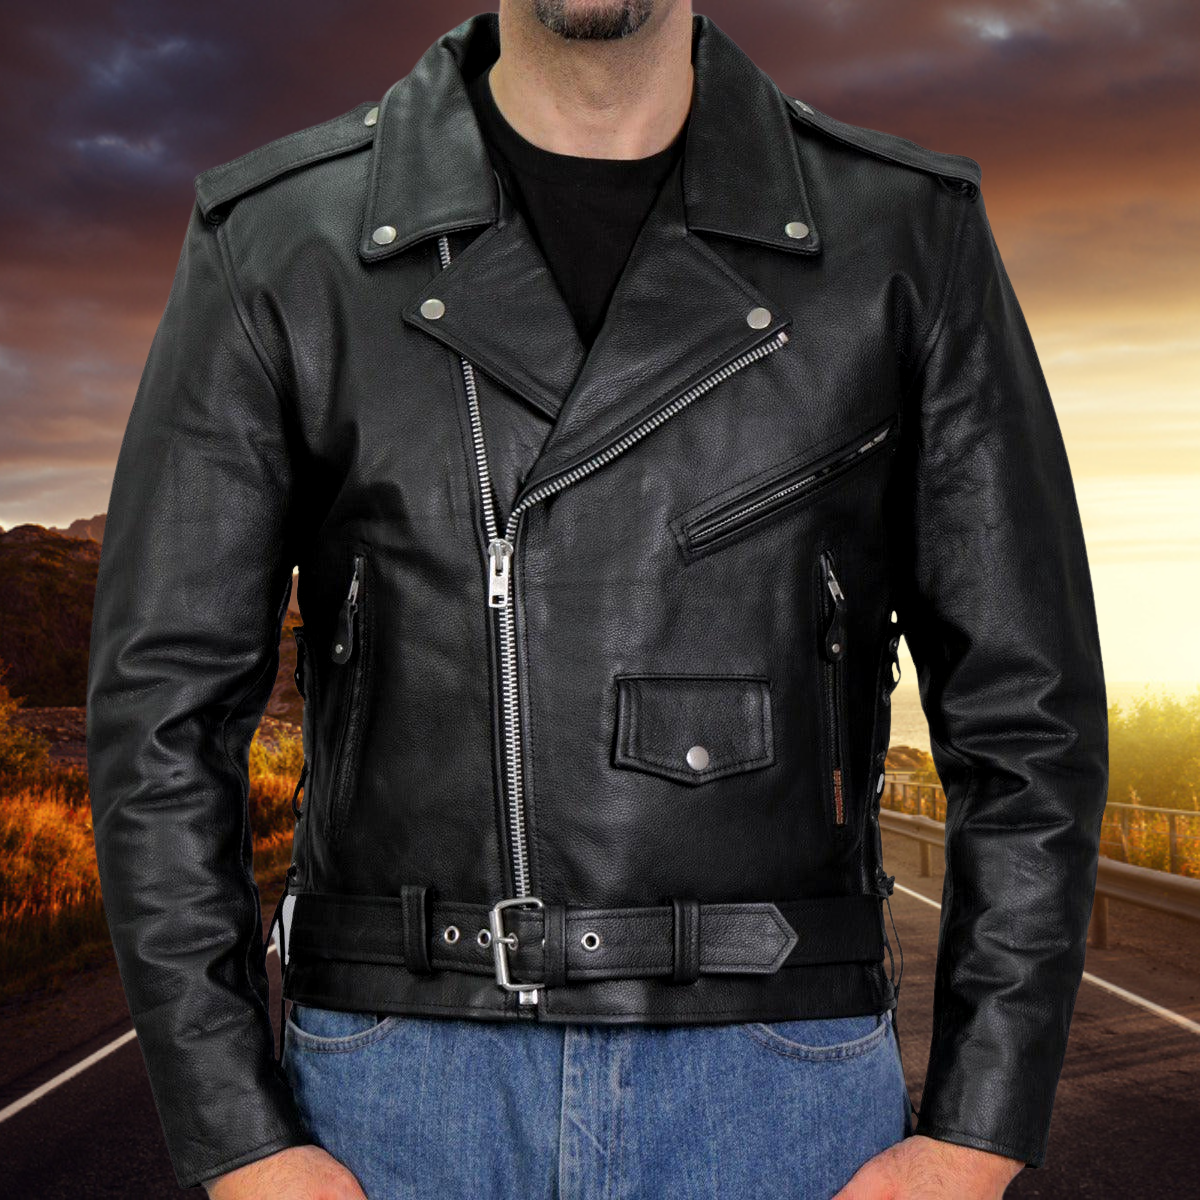 Hot Leathers Men's Classic Motorcycle Leather Jacket with Zip Out Lining